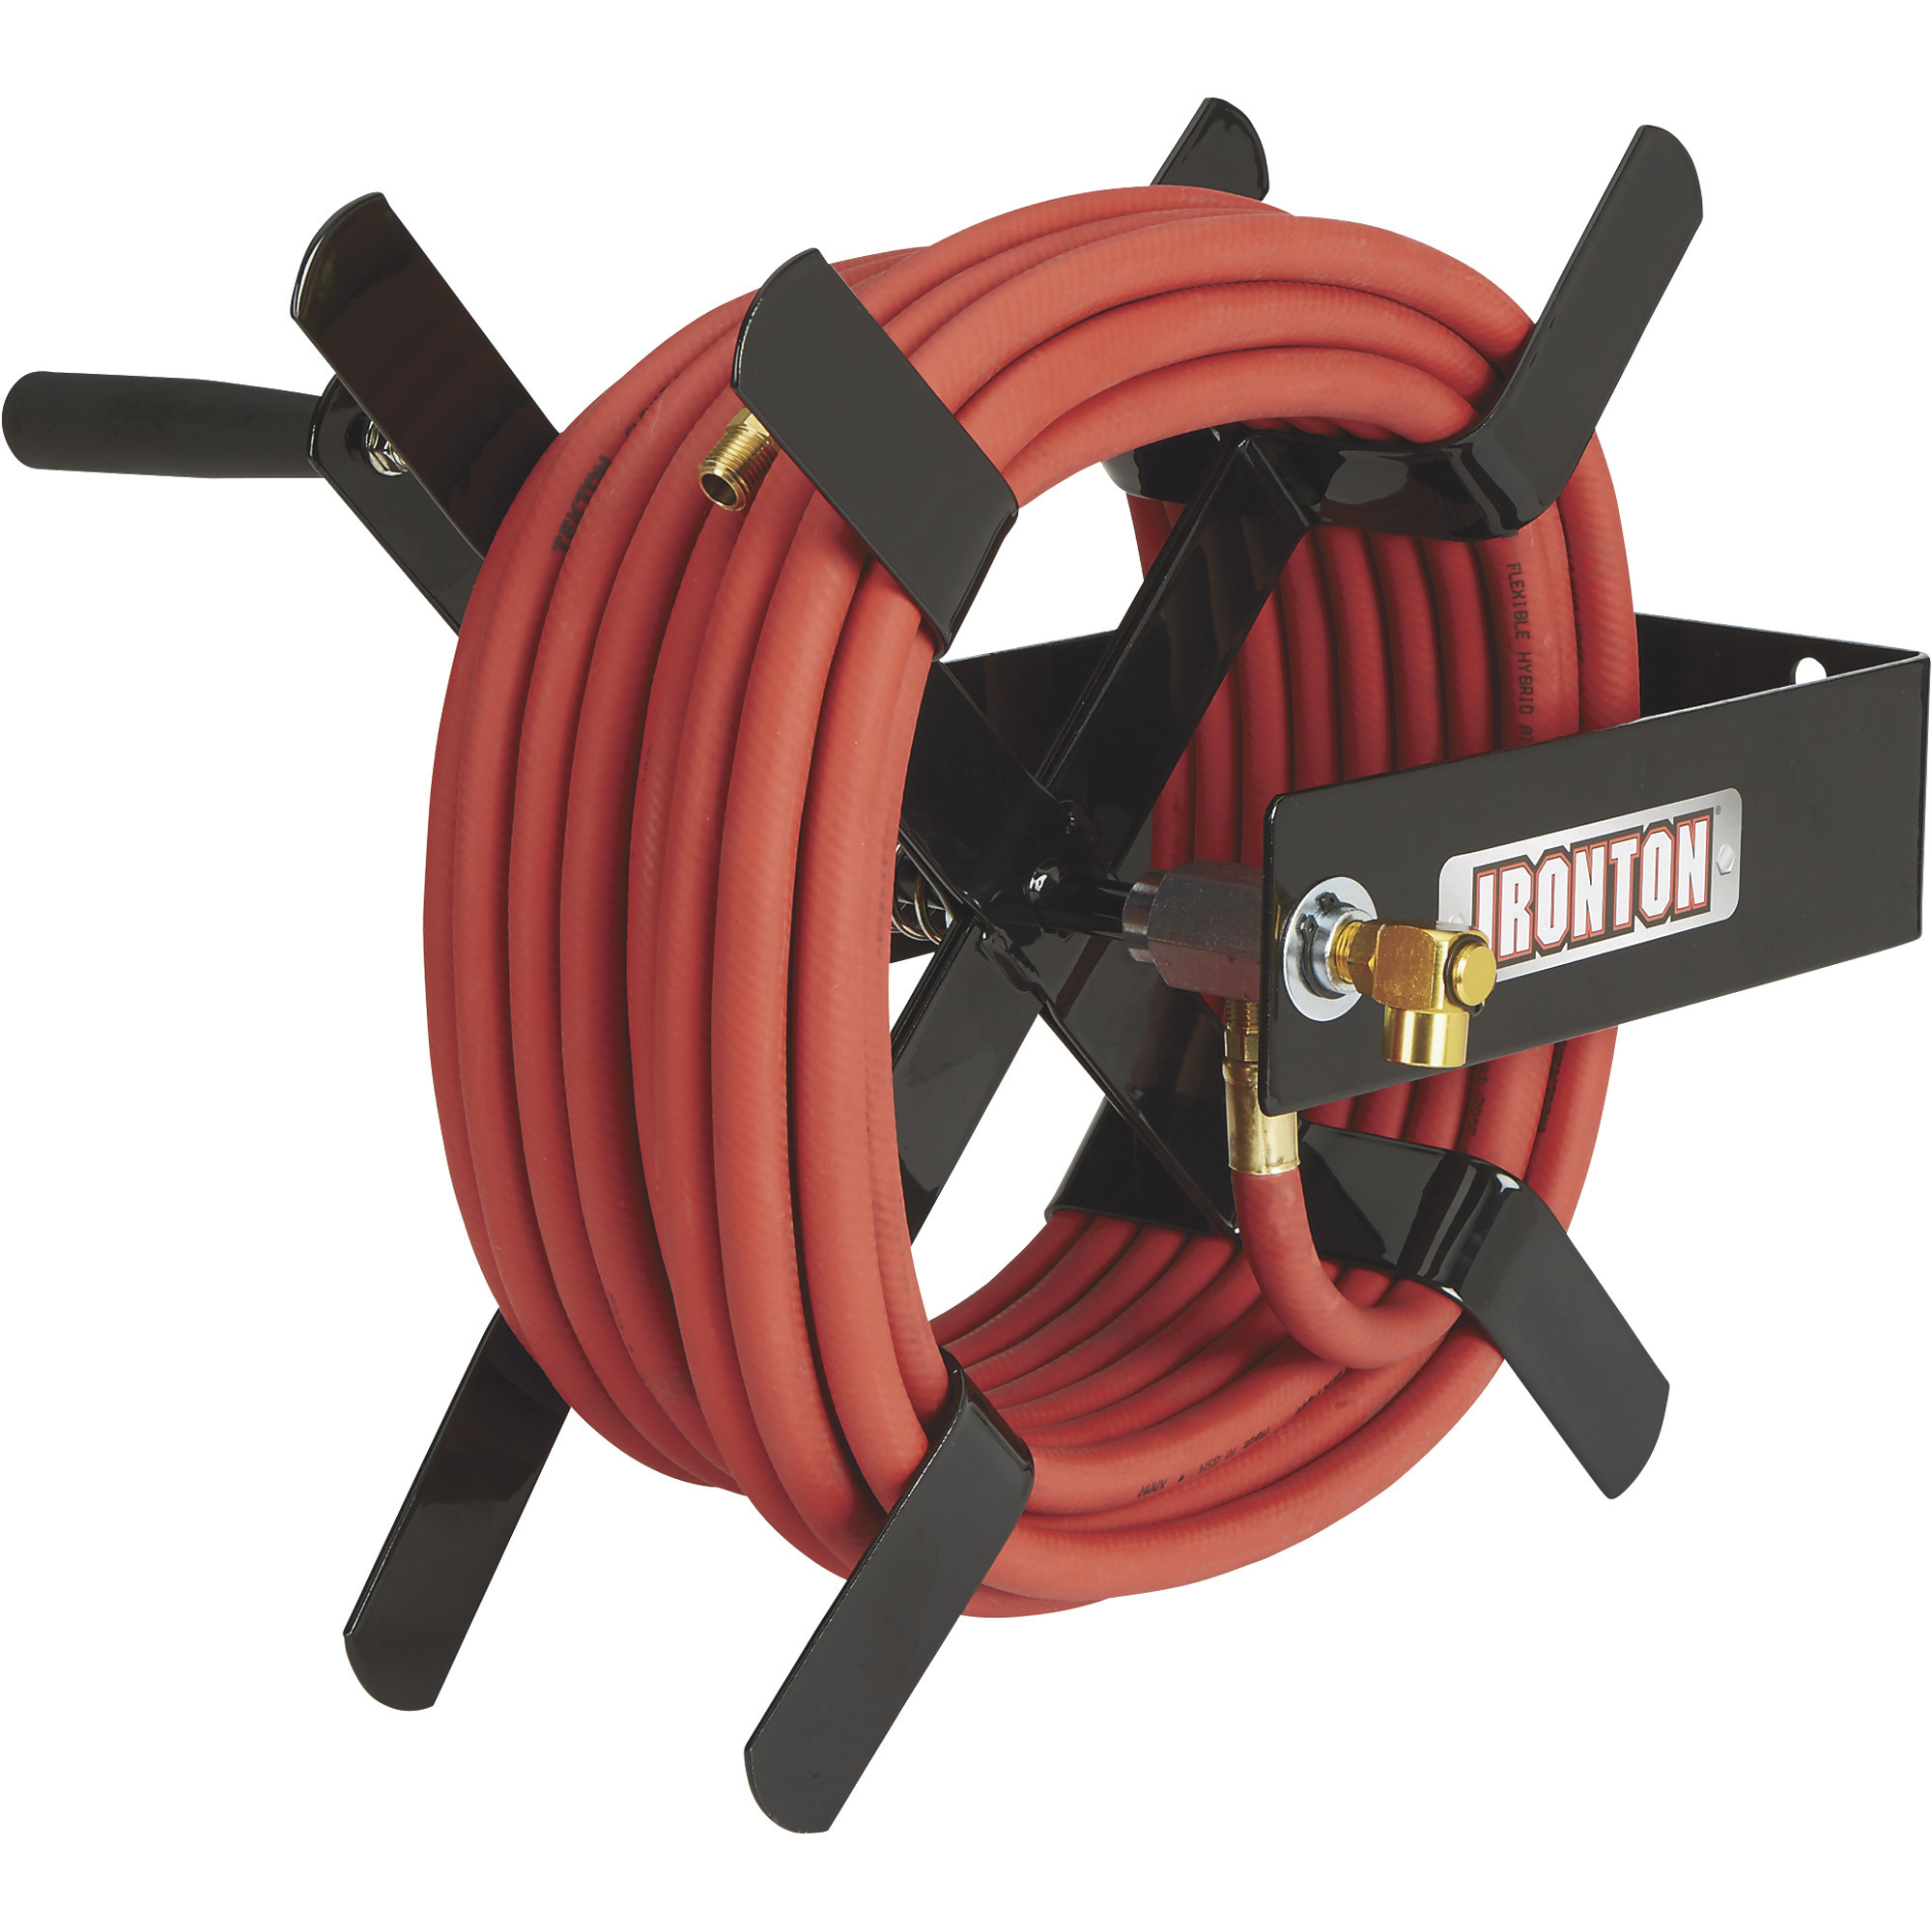 Ironton Wall-Mount Air Hose Reel, Holds 3/8in. x 100ft. Hose, Max. 100 PSI